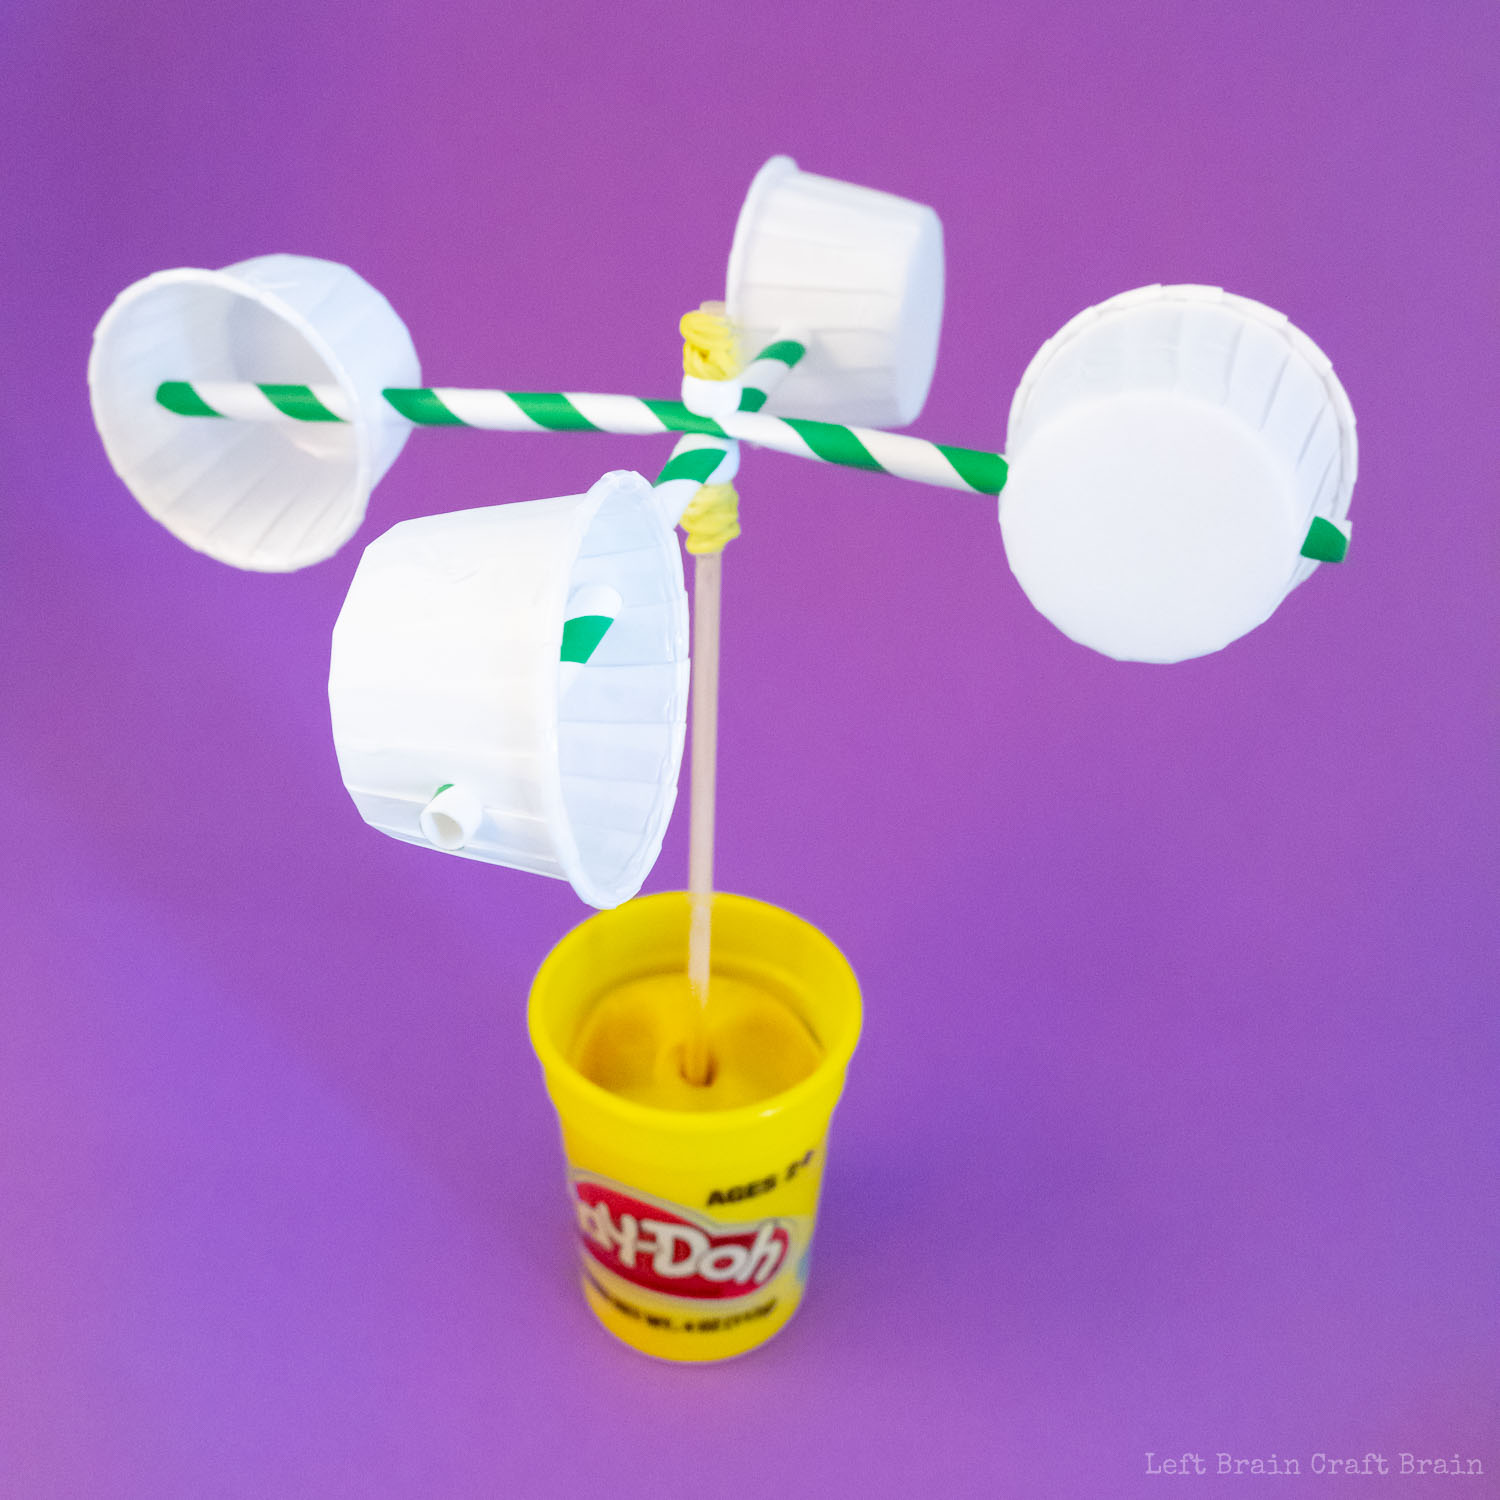 prop anemometer bamboo skewer in playdoh cup on purple background